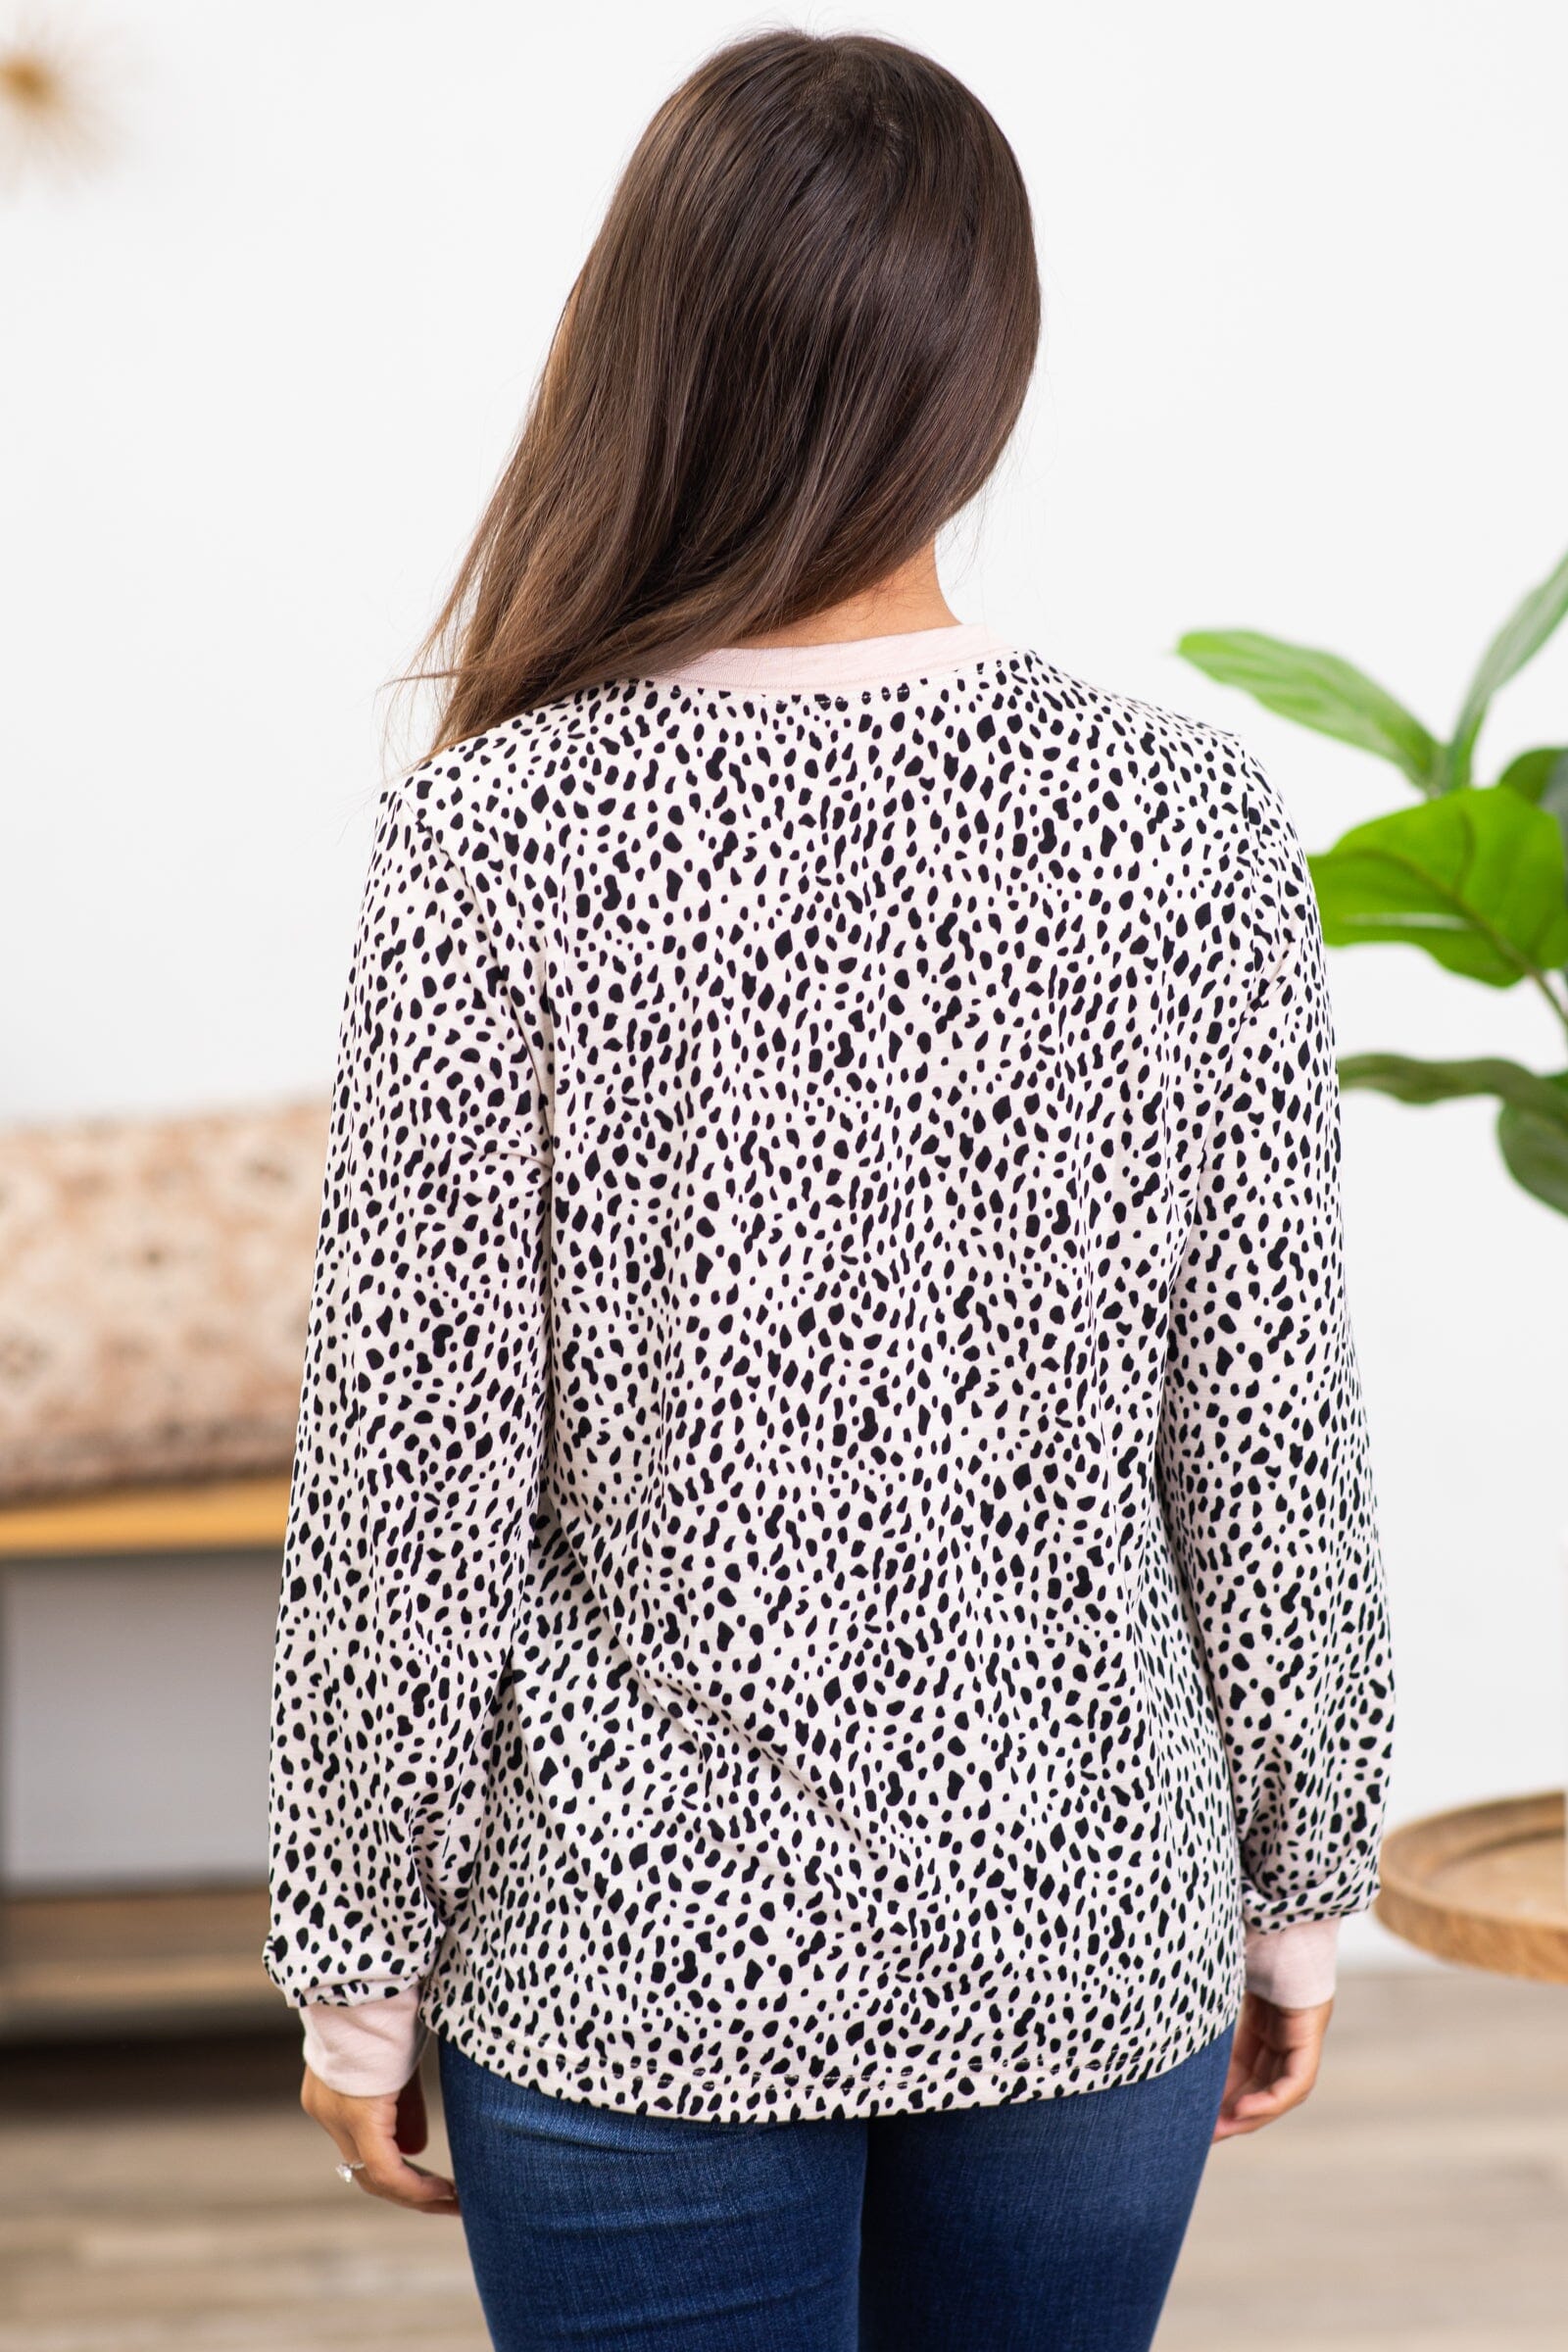 Beige and Black Animal Print Long Sleeve Top - Filly Flair